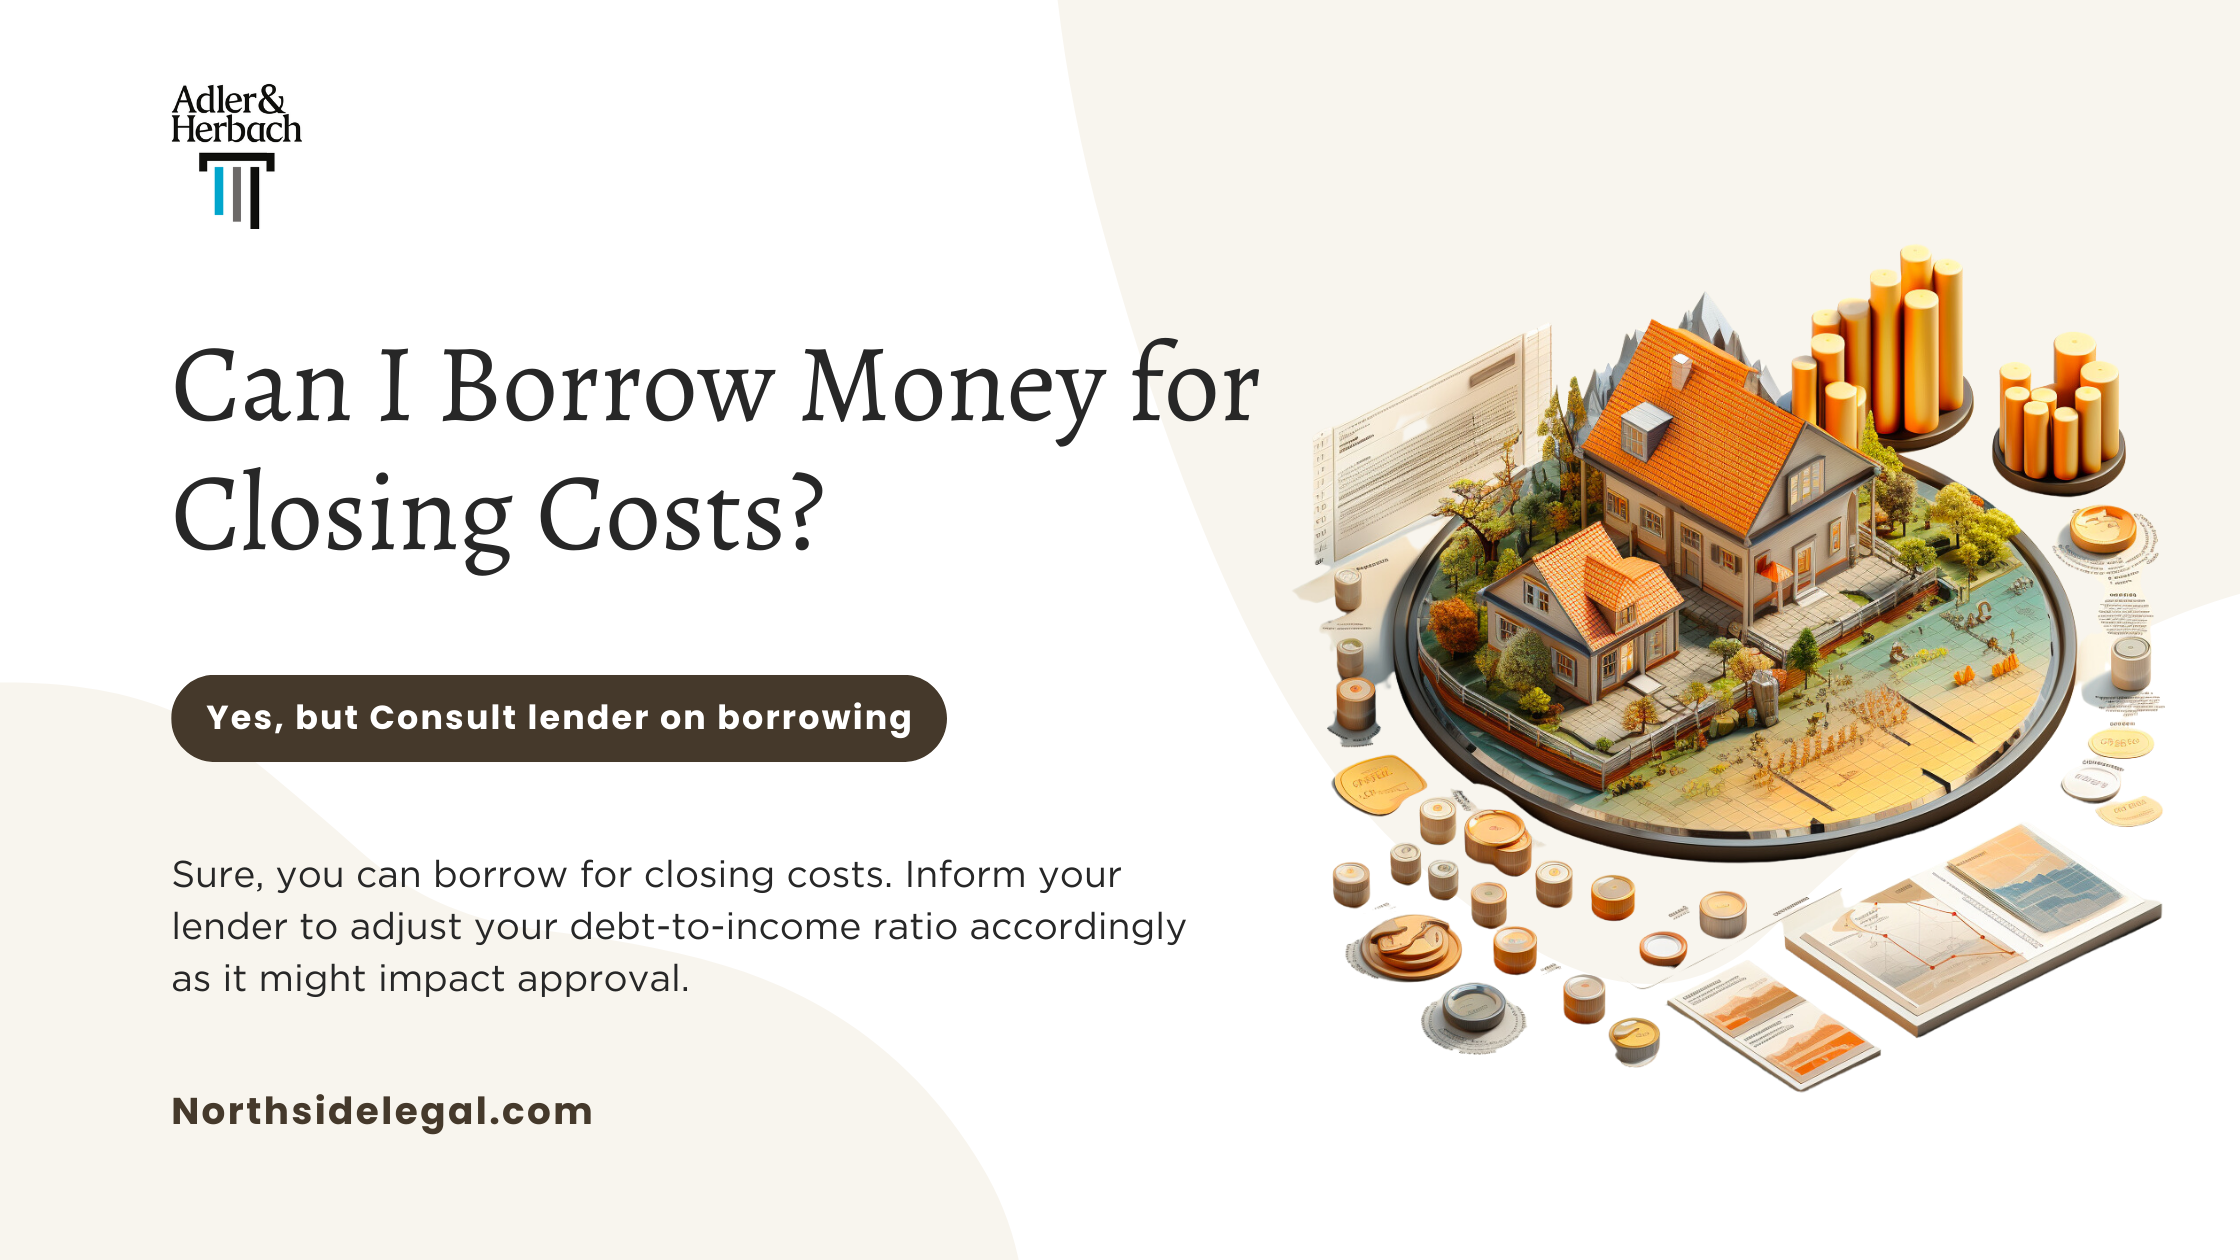 Can I Borrow Money for Closing Costs on a Home Purchase?